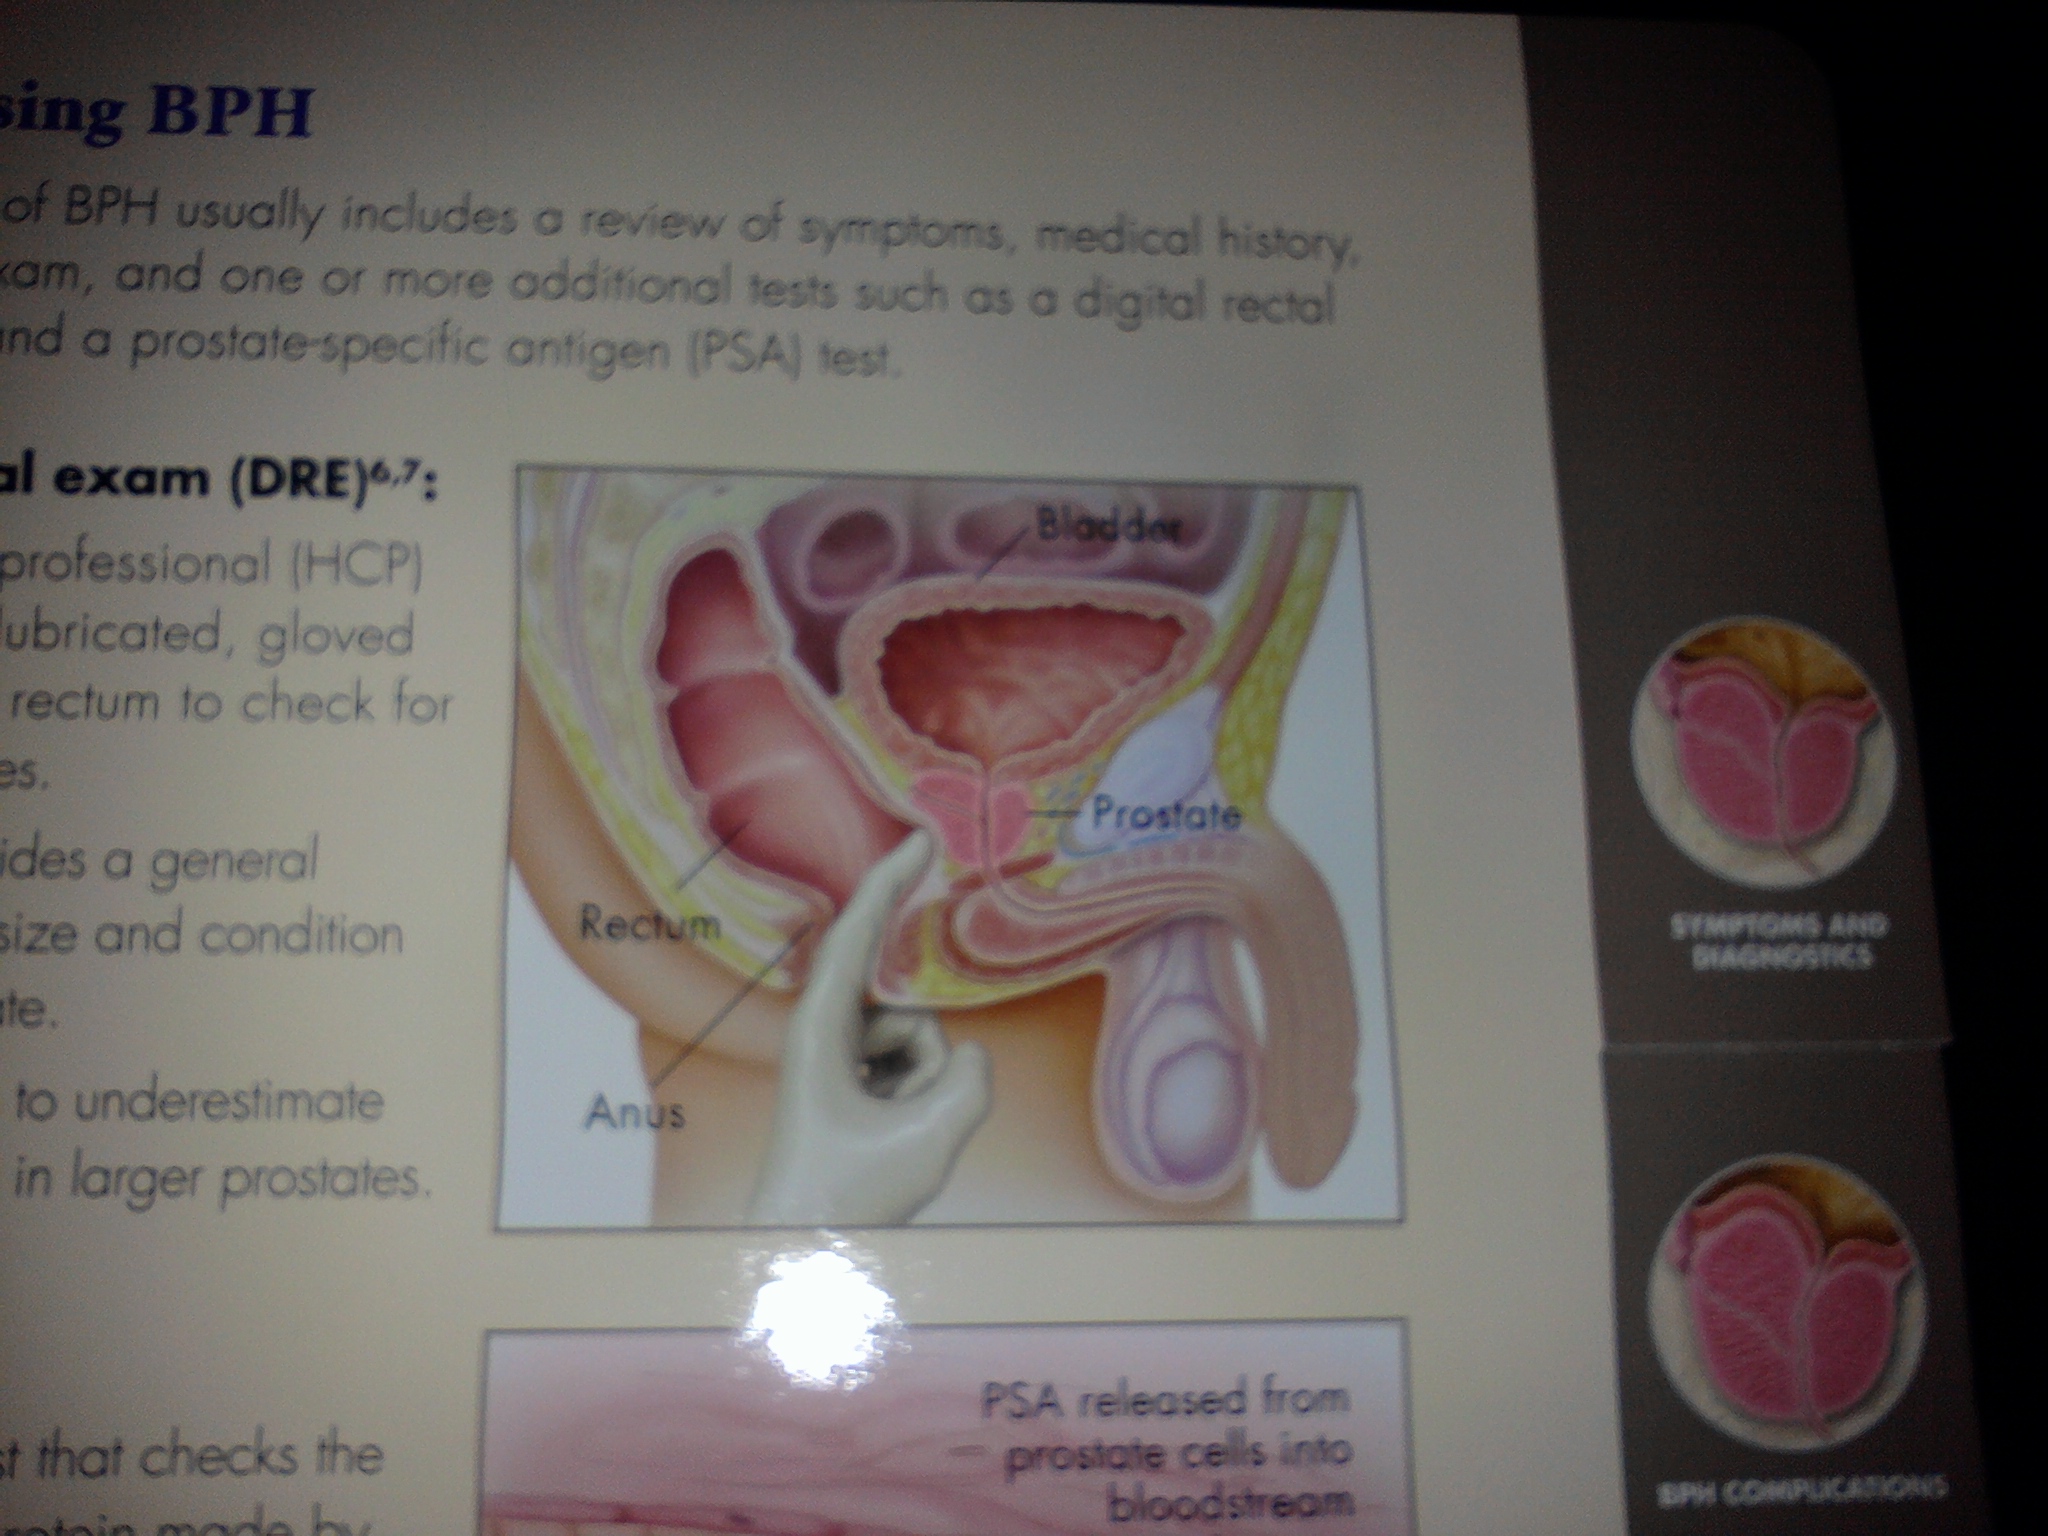 Image found at Urology office book